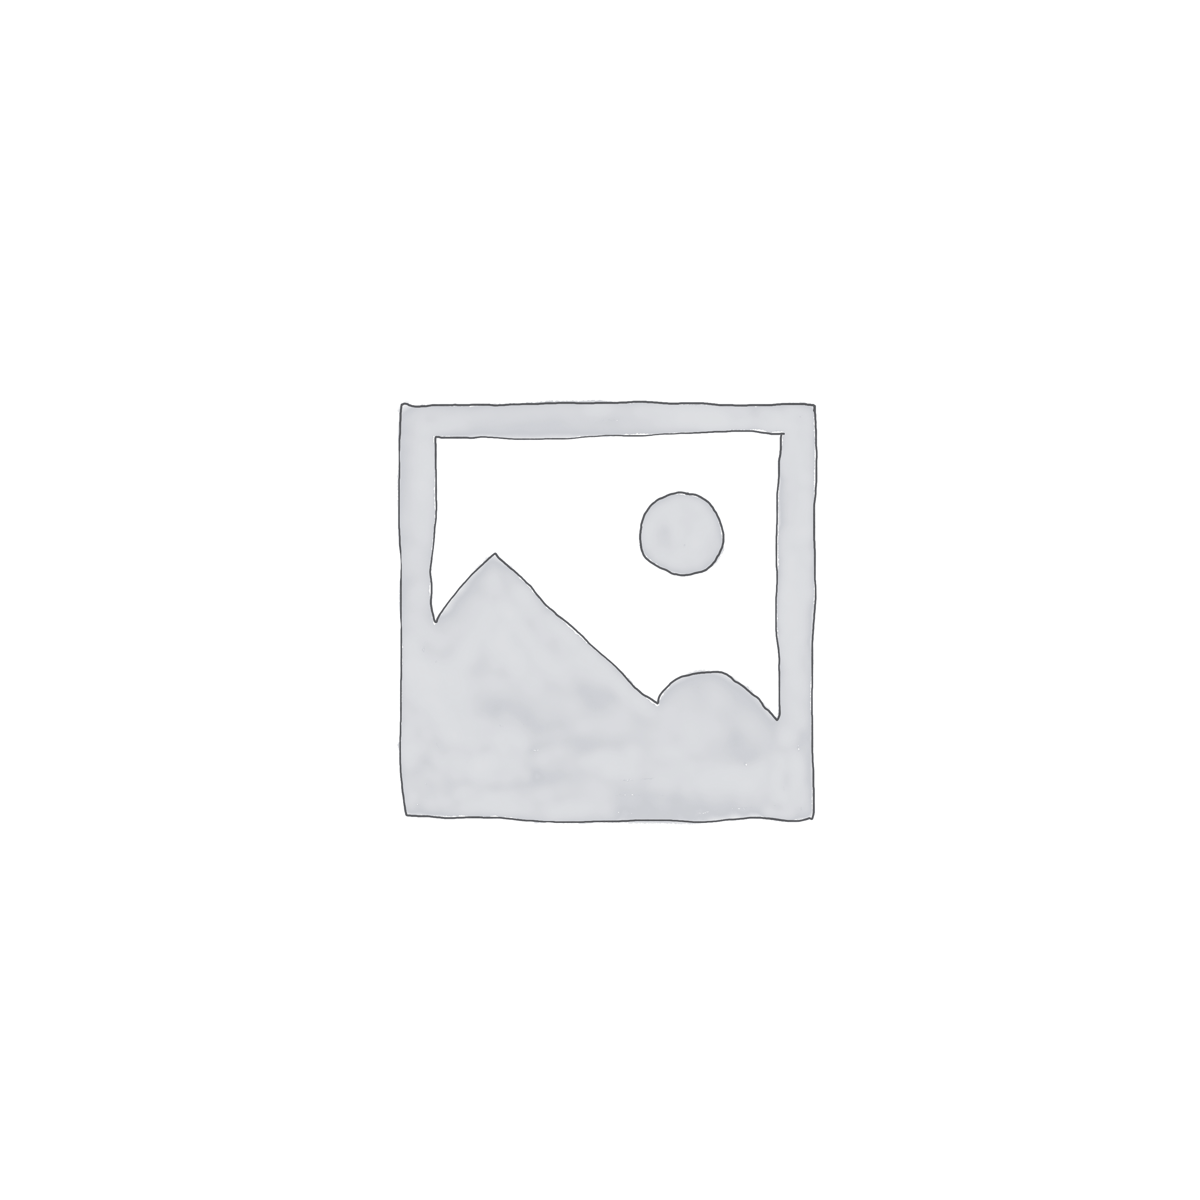 An image of a square with a mountain on it.